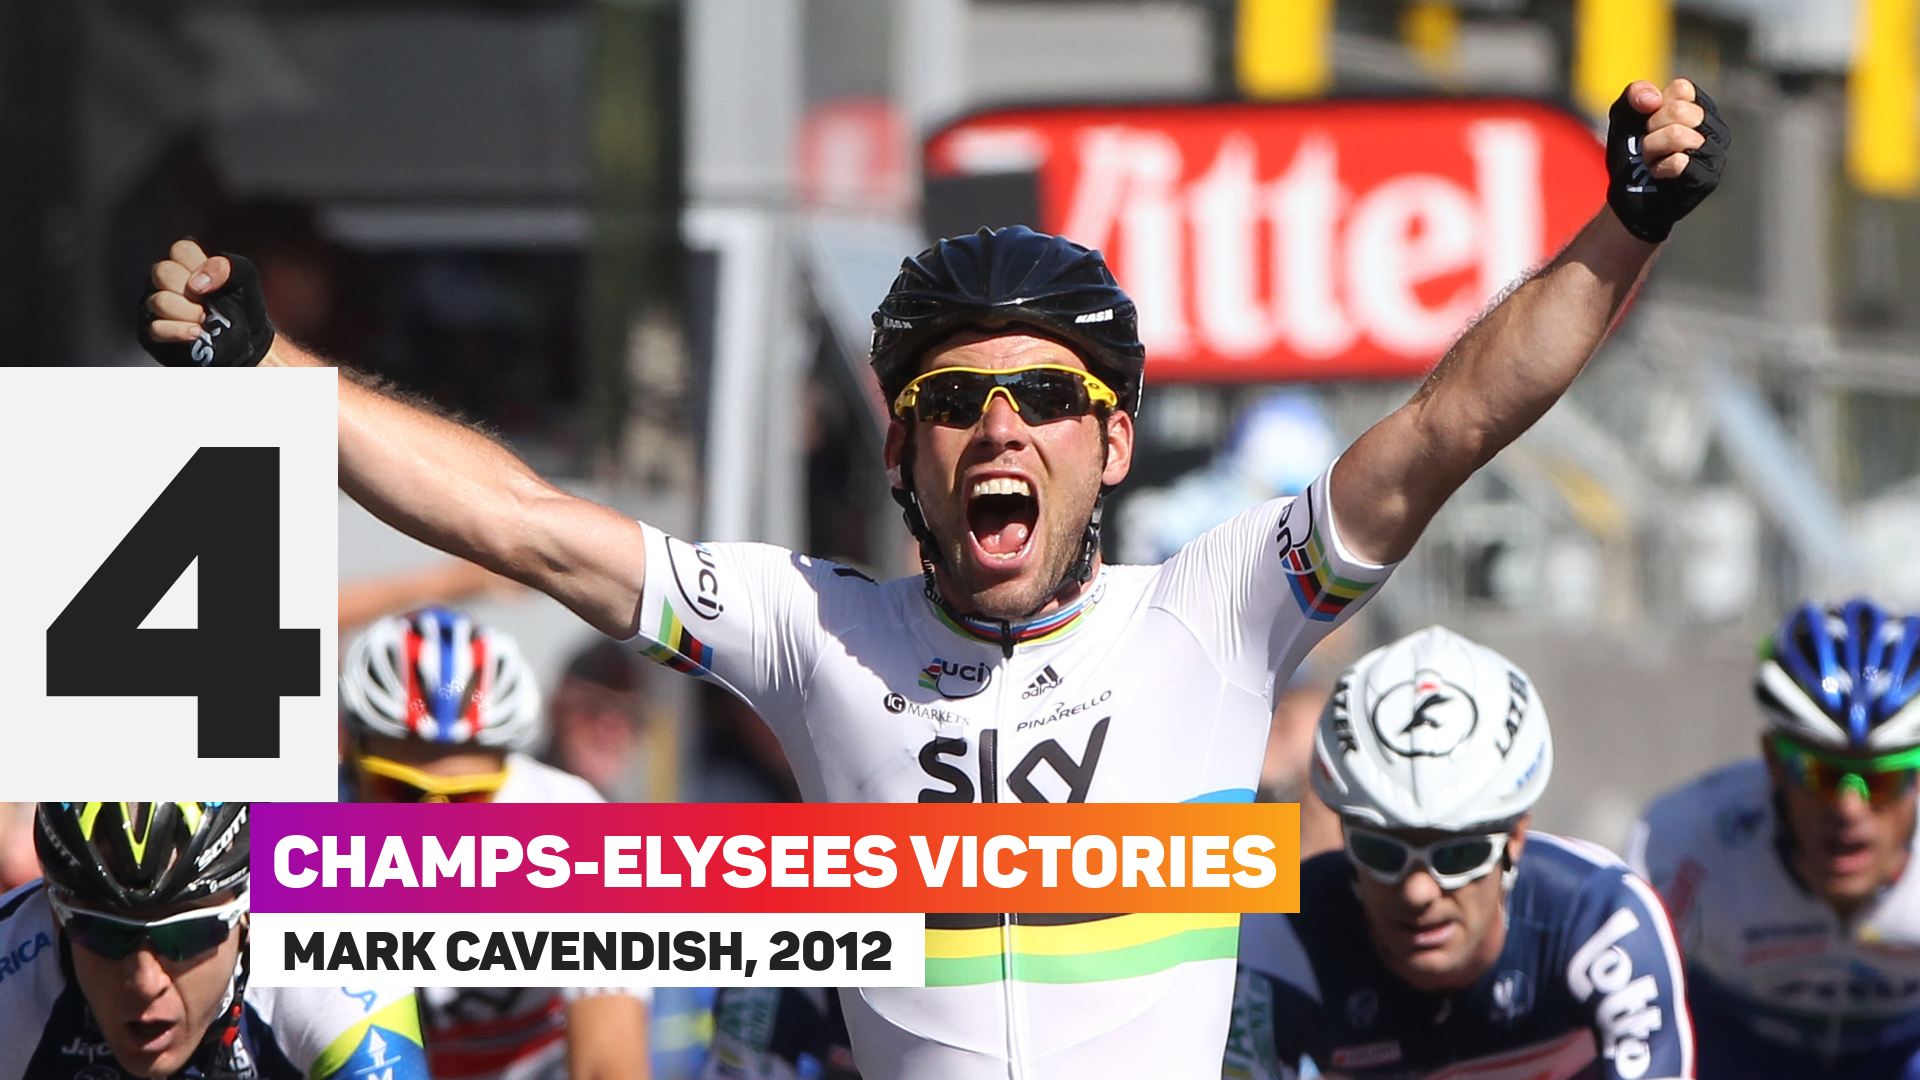 Mark Cavendish set a Champs-Elysees record in 2012